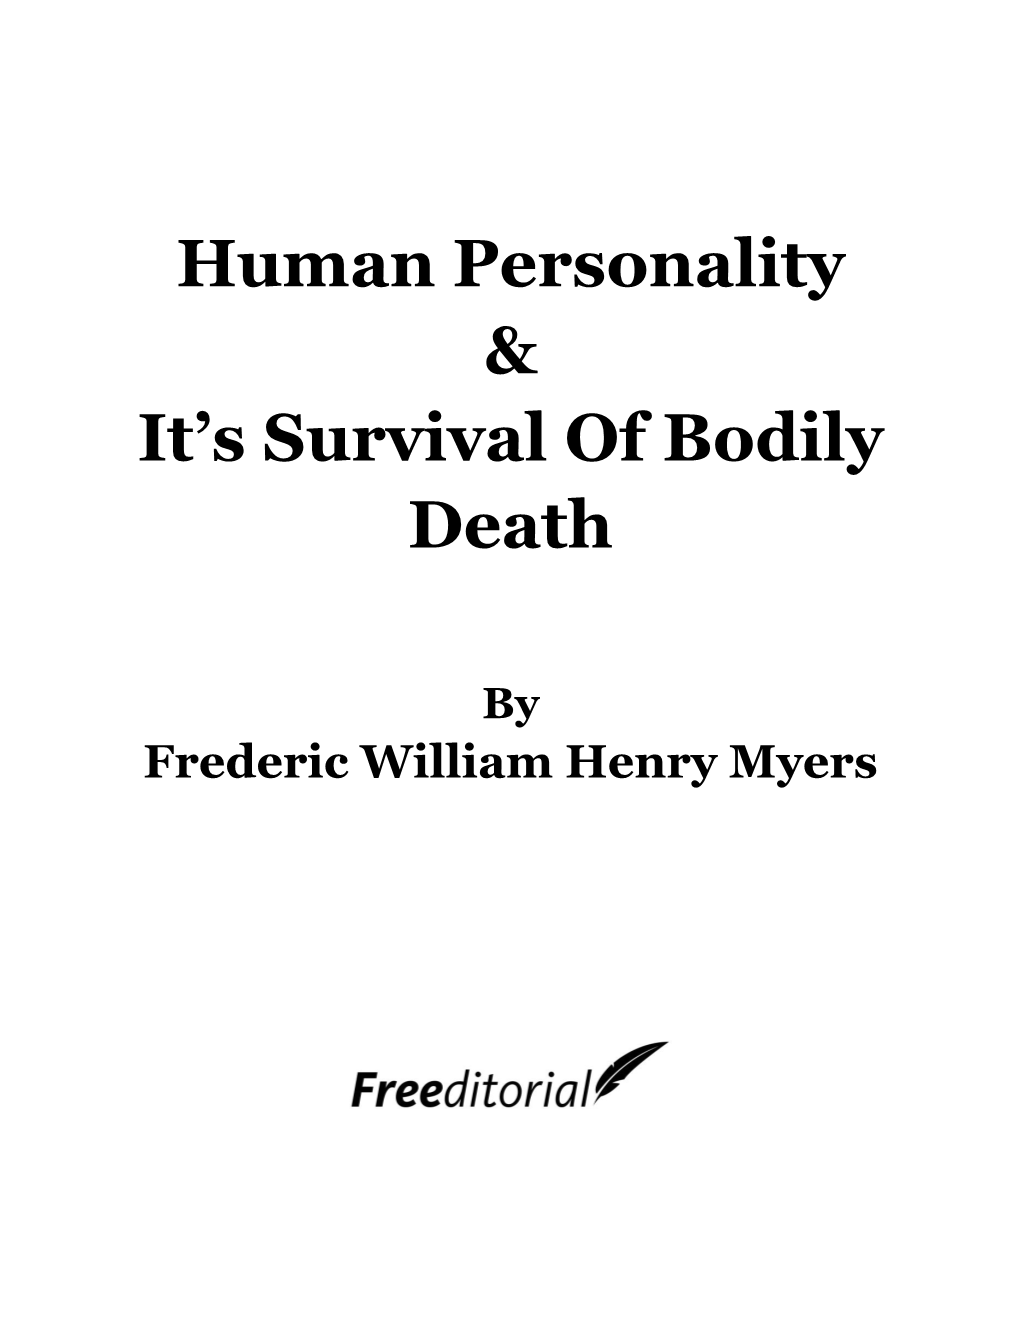 Human Personality & It's Survival of Bodily Death